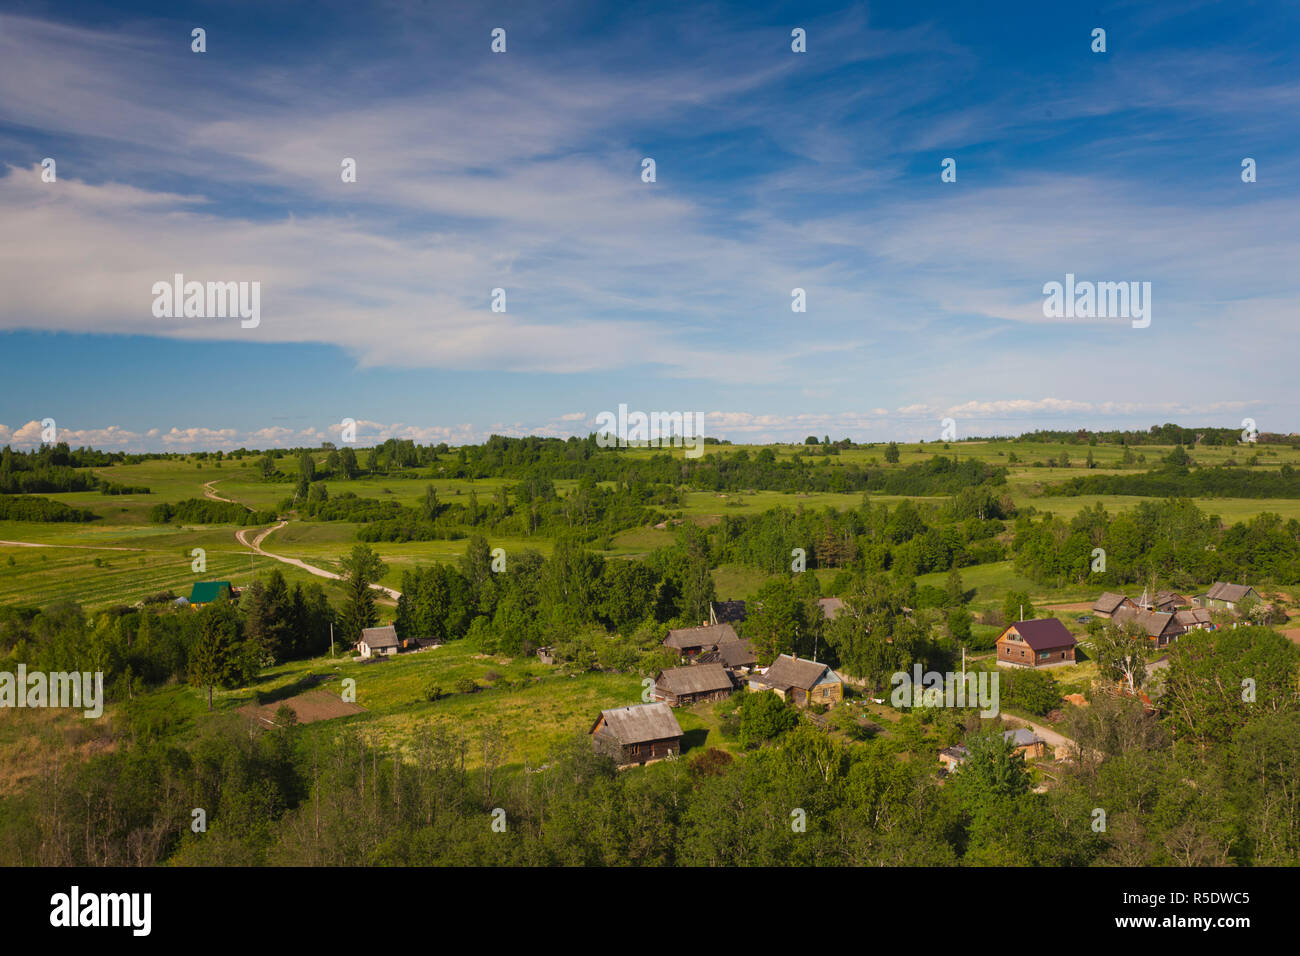 Russia, Pskovskaya Oblast, Stary Izborsk, ruins of the oldest stone fortress in Russia, Stock Photo